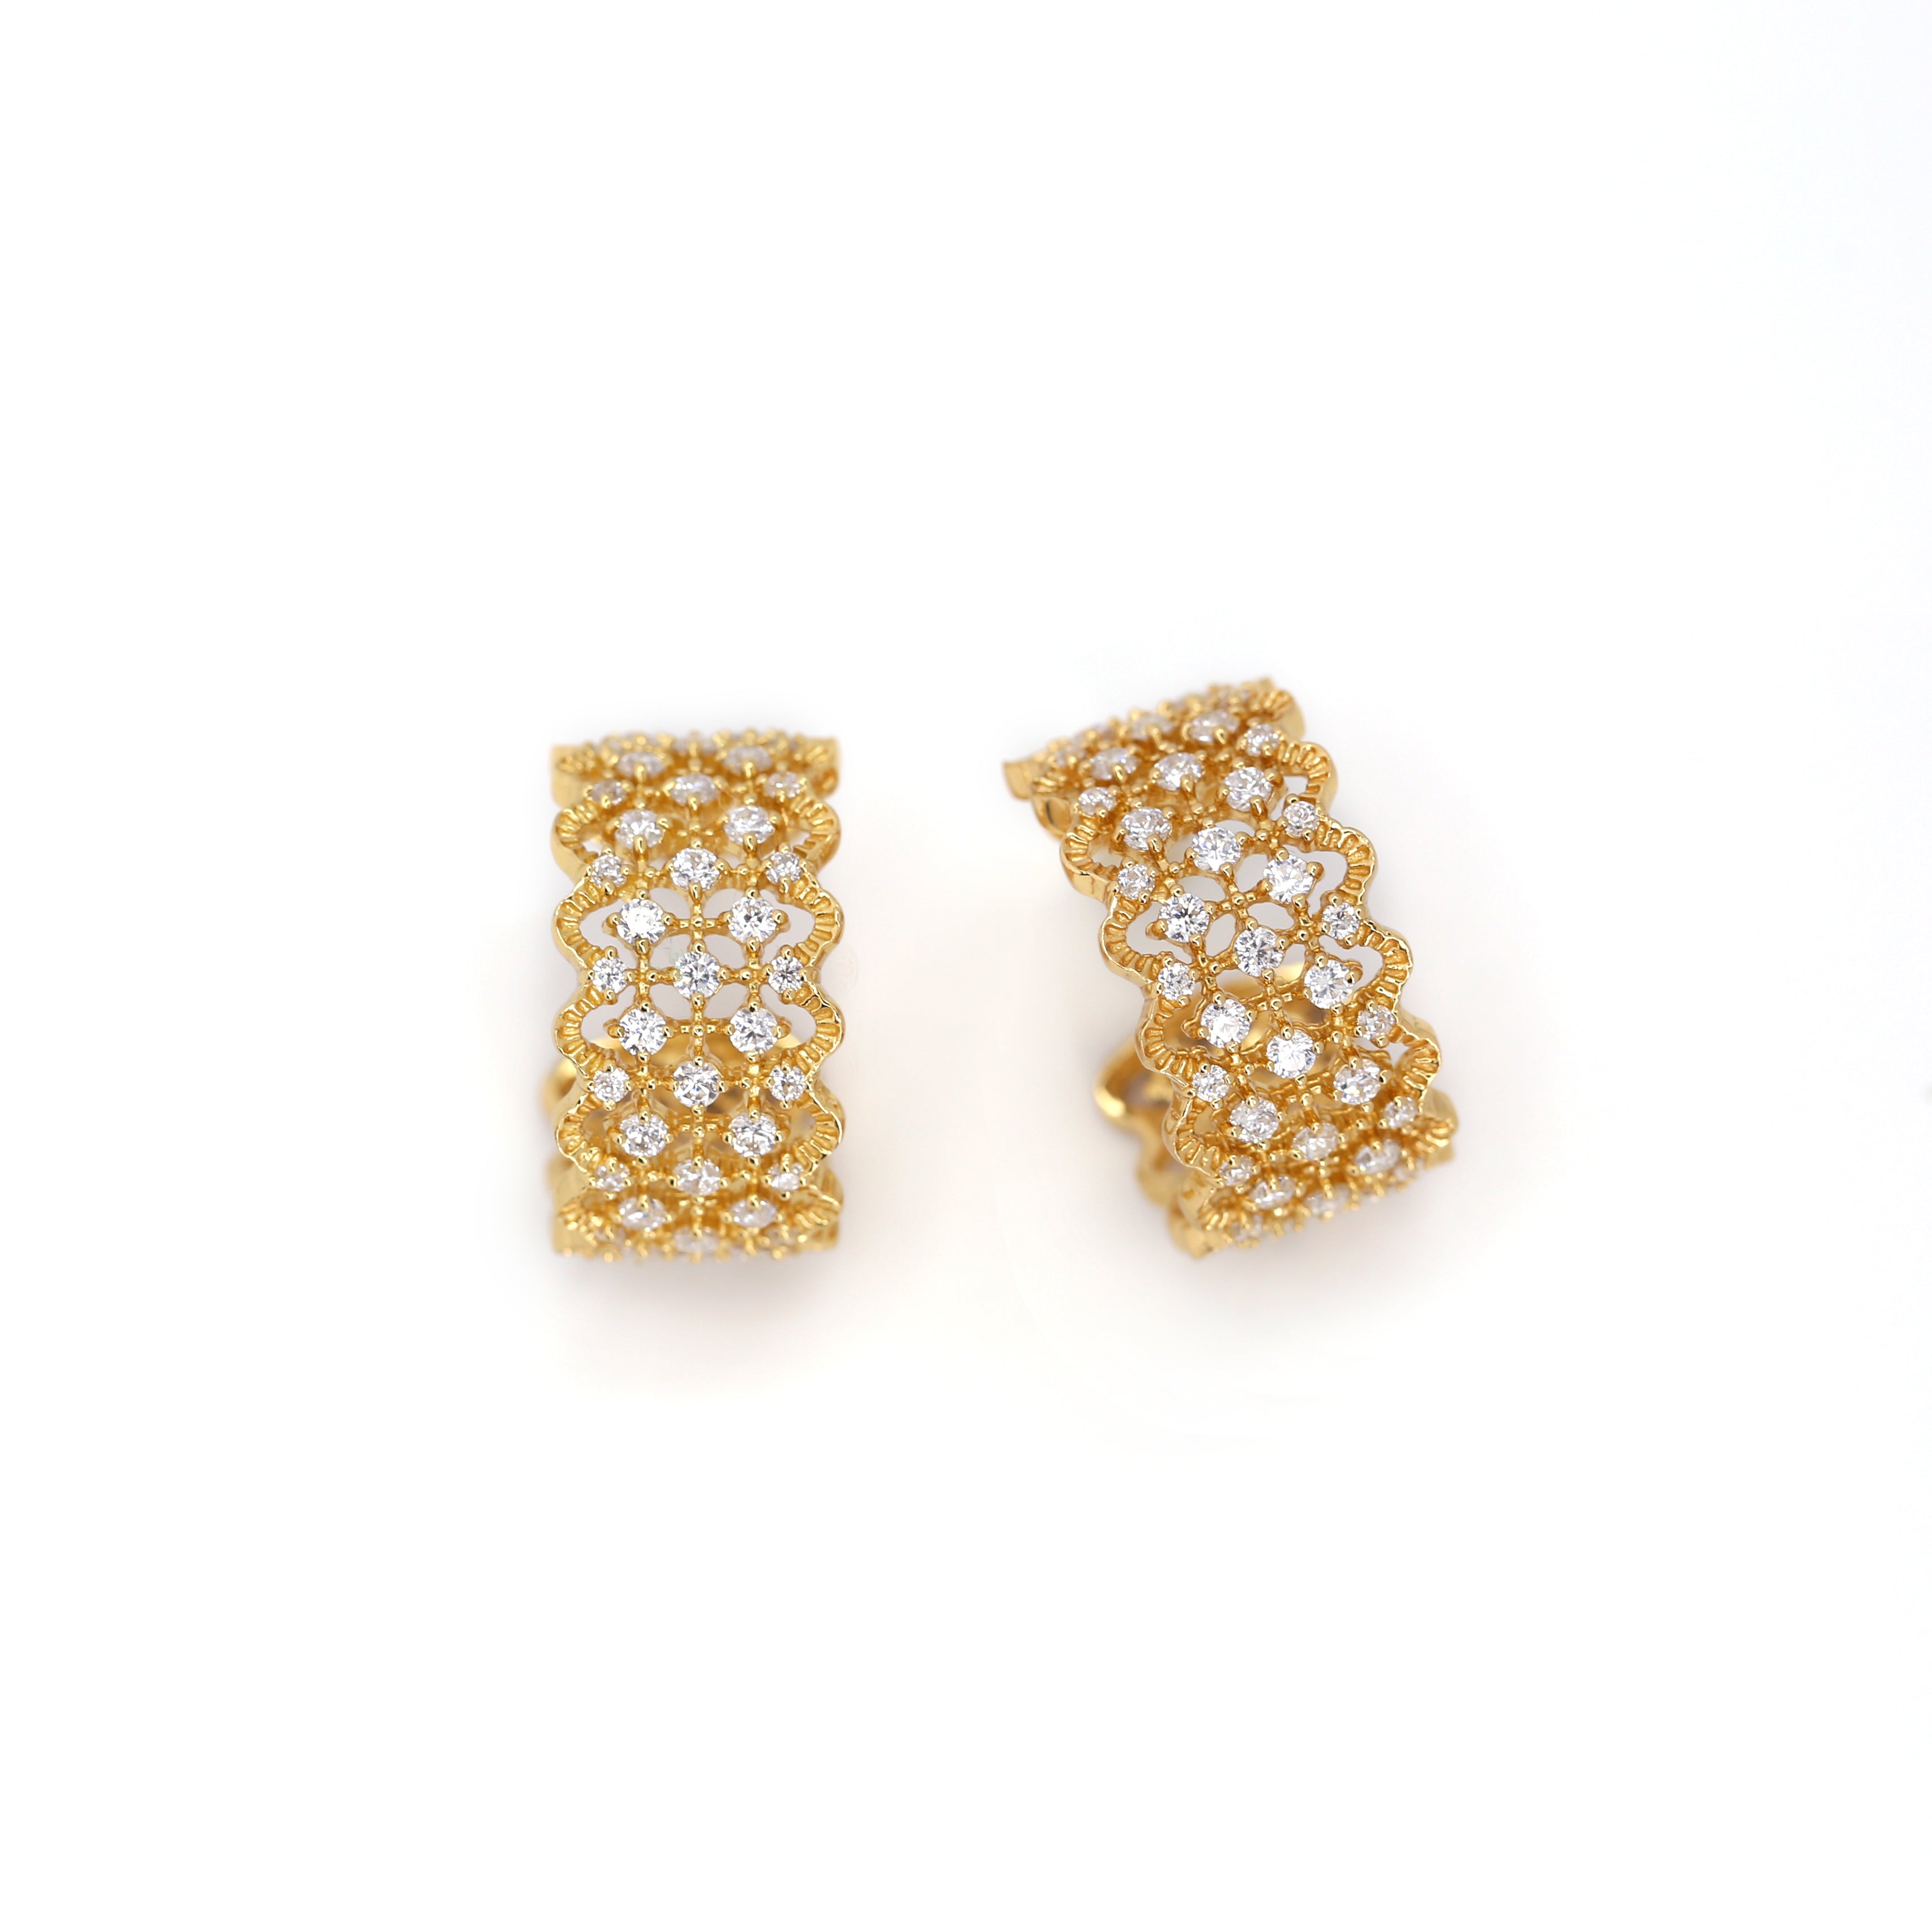 Lacy Beaded CZ Diamond Earrings 18K Gold Over Sterling Silver